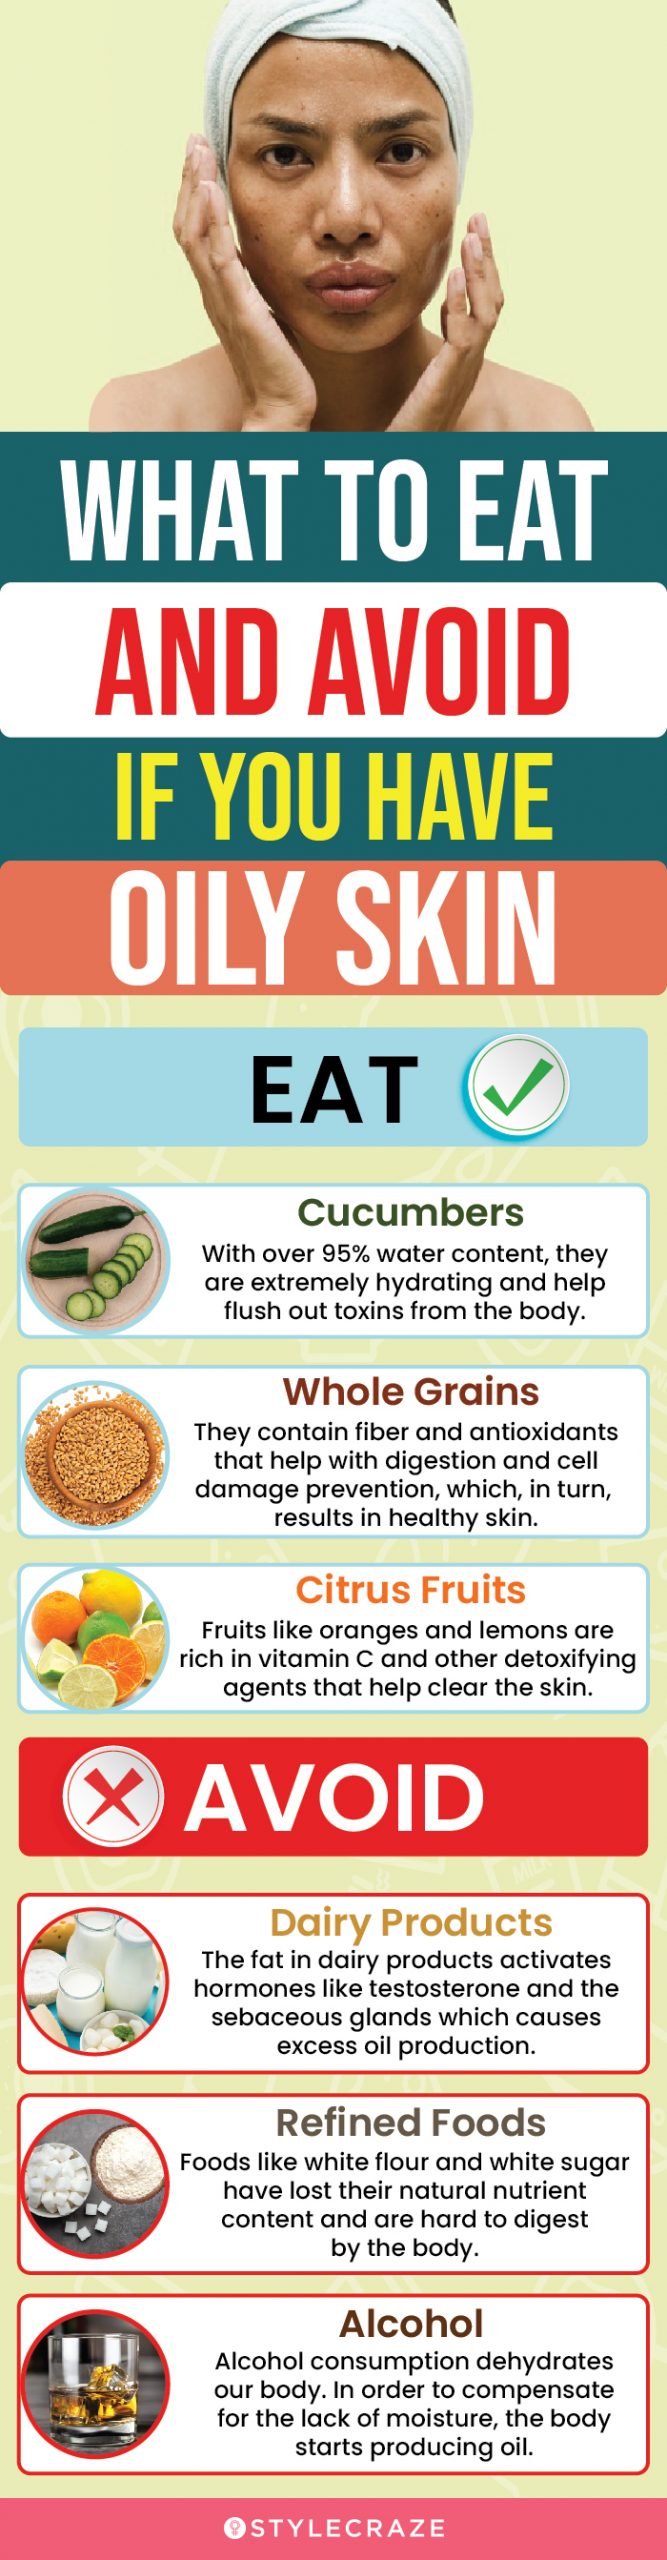 what to eat and avoid if you have oily skin (infographic)